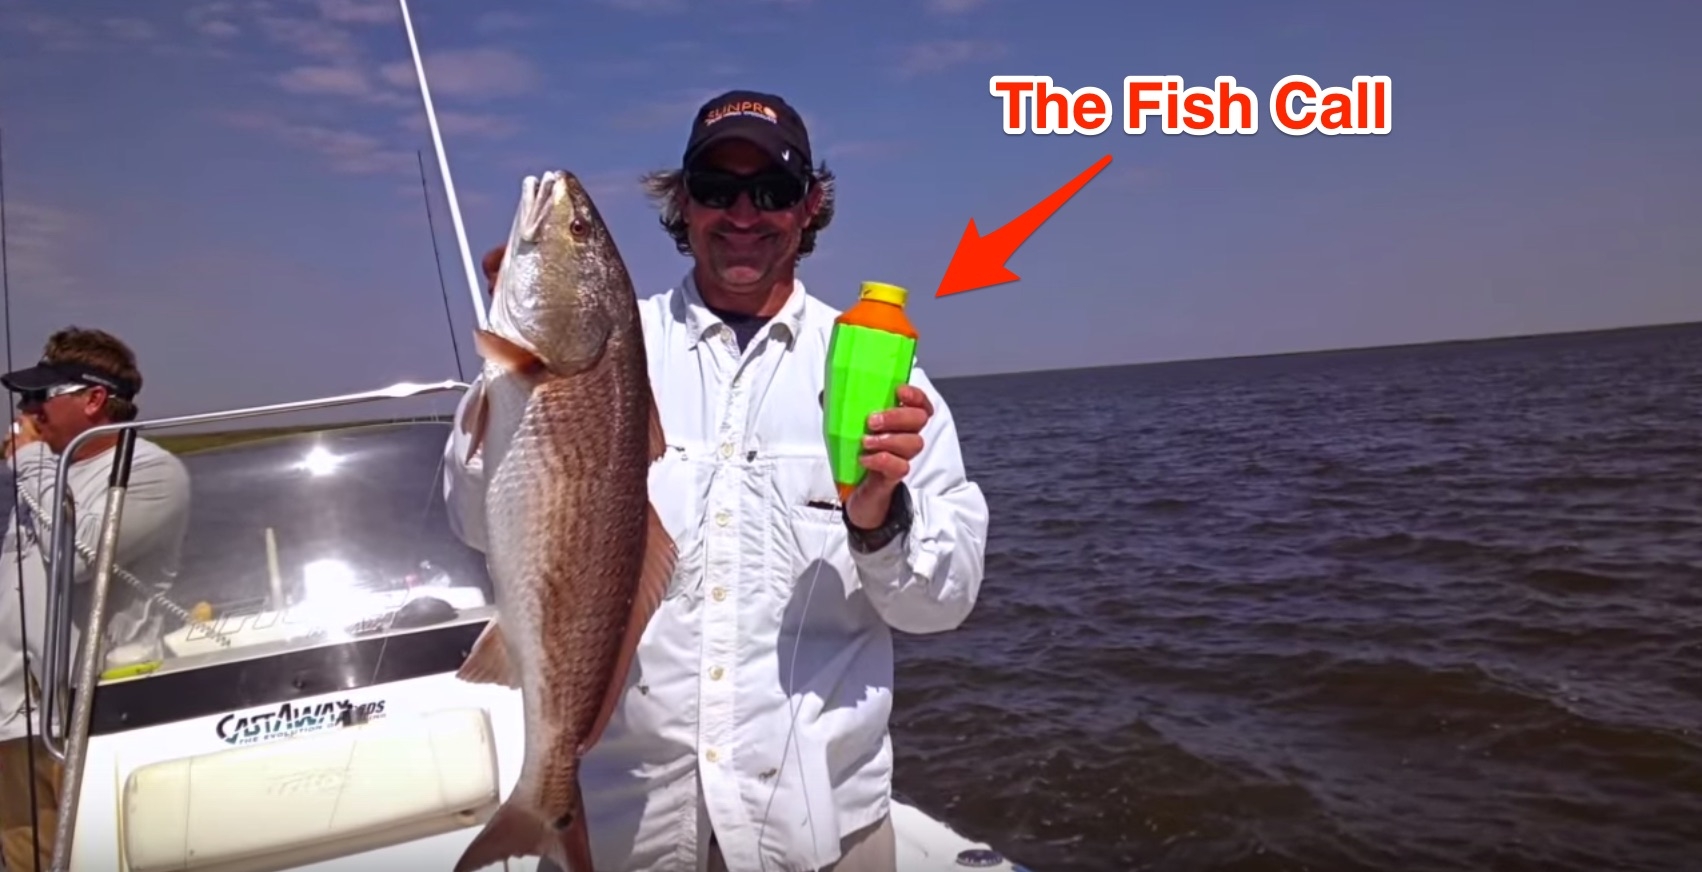 The Fish Call - This Nerf Football Like Fish Attractor Could